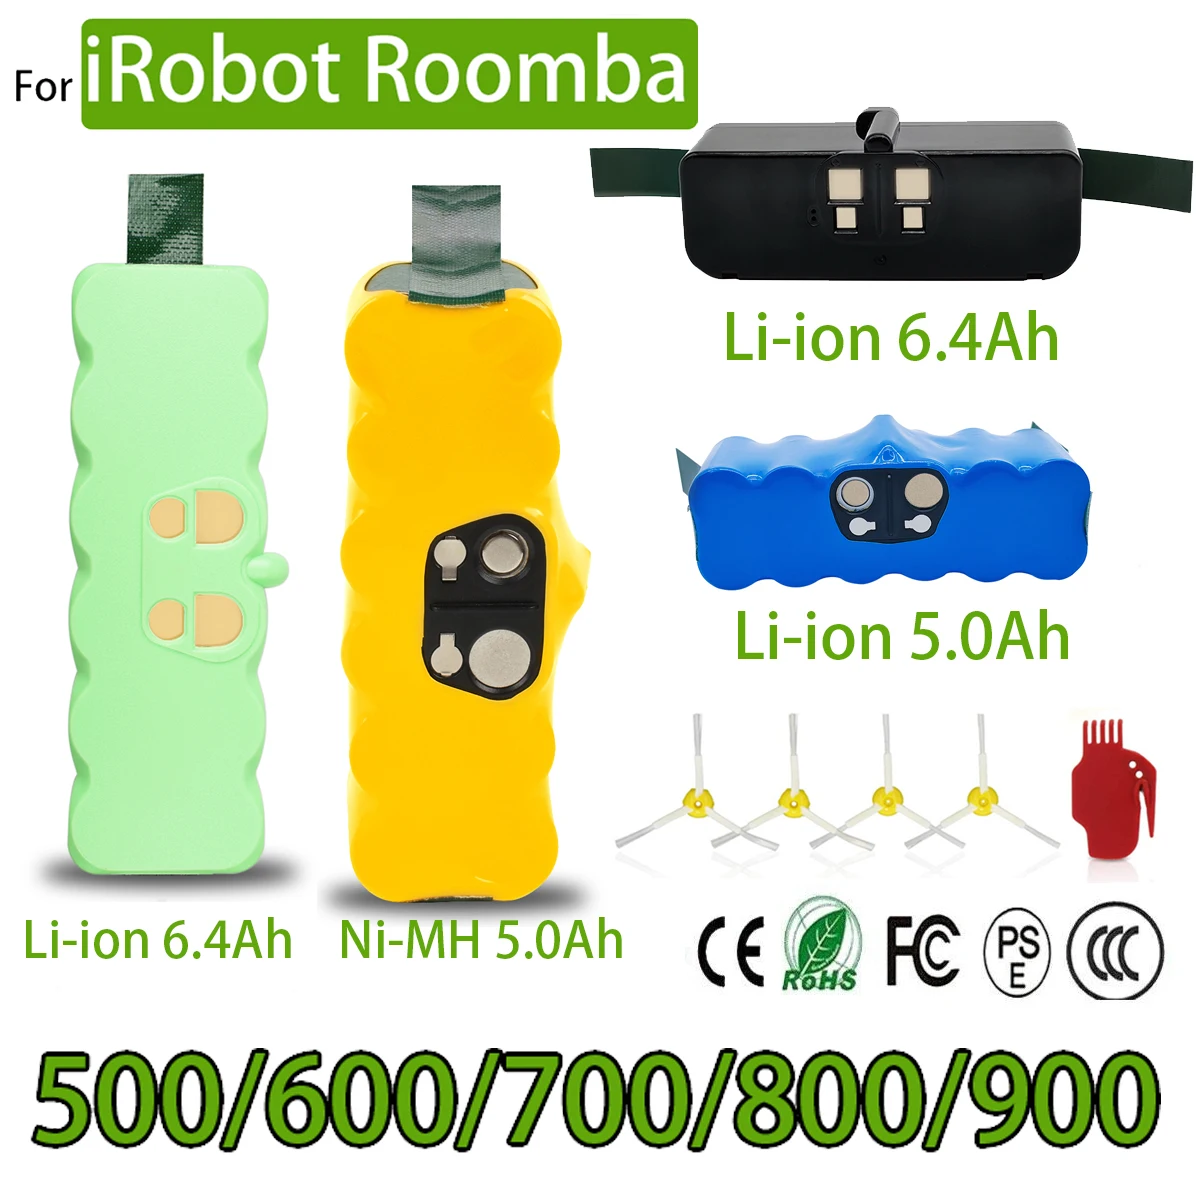 

14.4V For iRobot Roomba 500 Vacuum Cleaner Battery 900 600 700 800 785 530 560 650 630 620 650 770 780 Rechargeable Battery